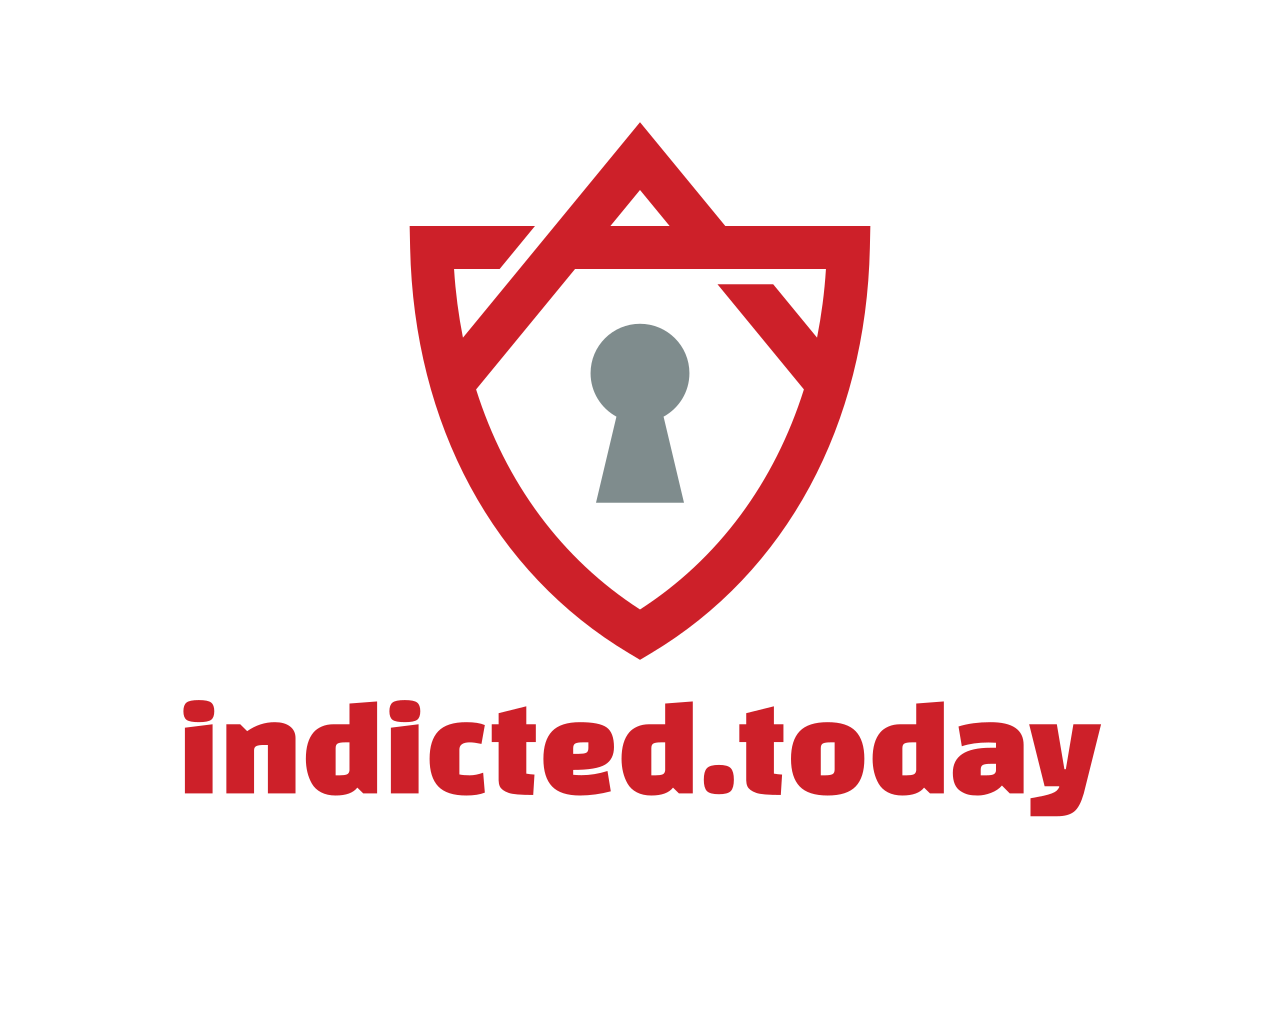 indicted.today